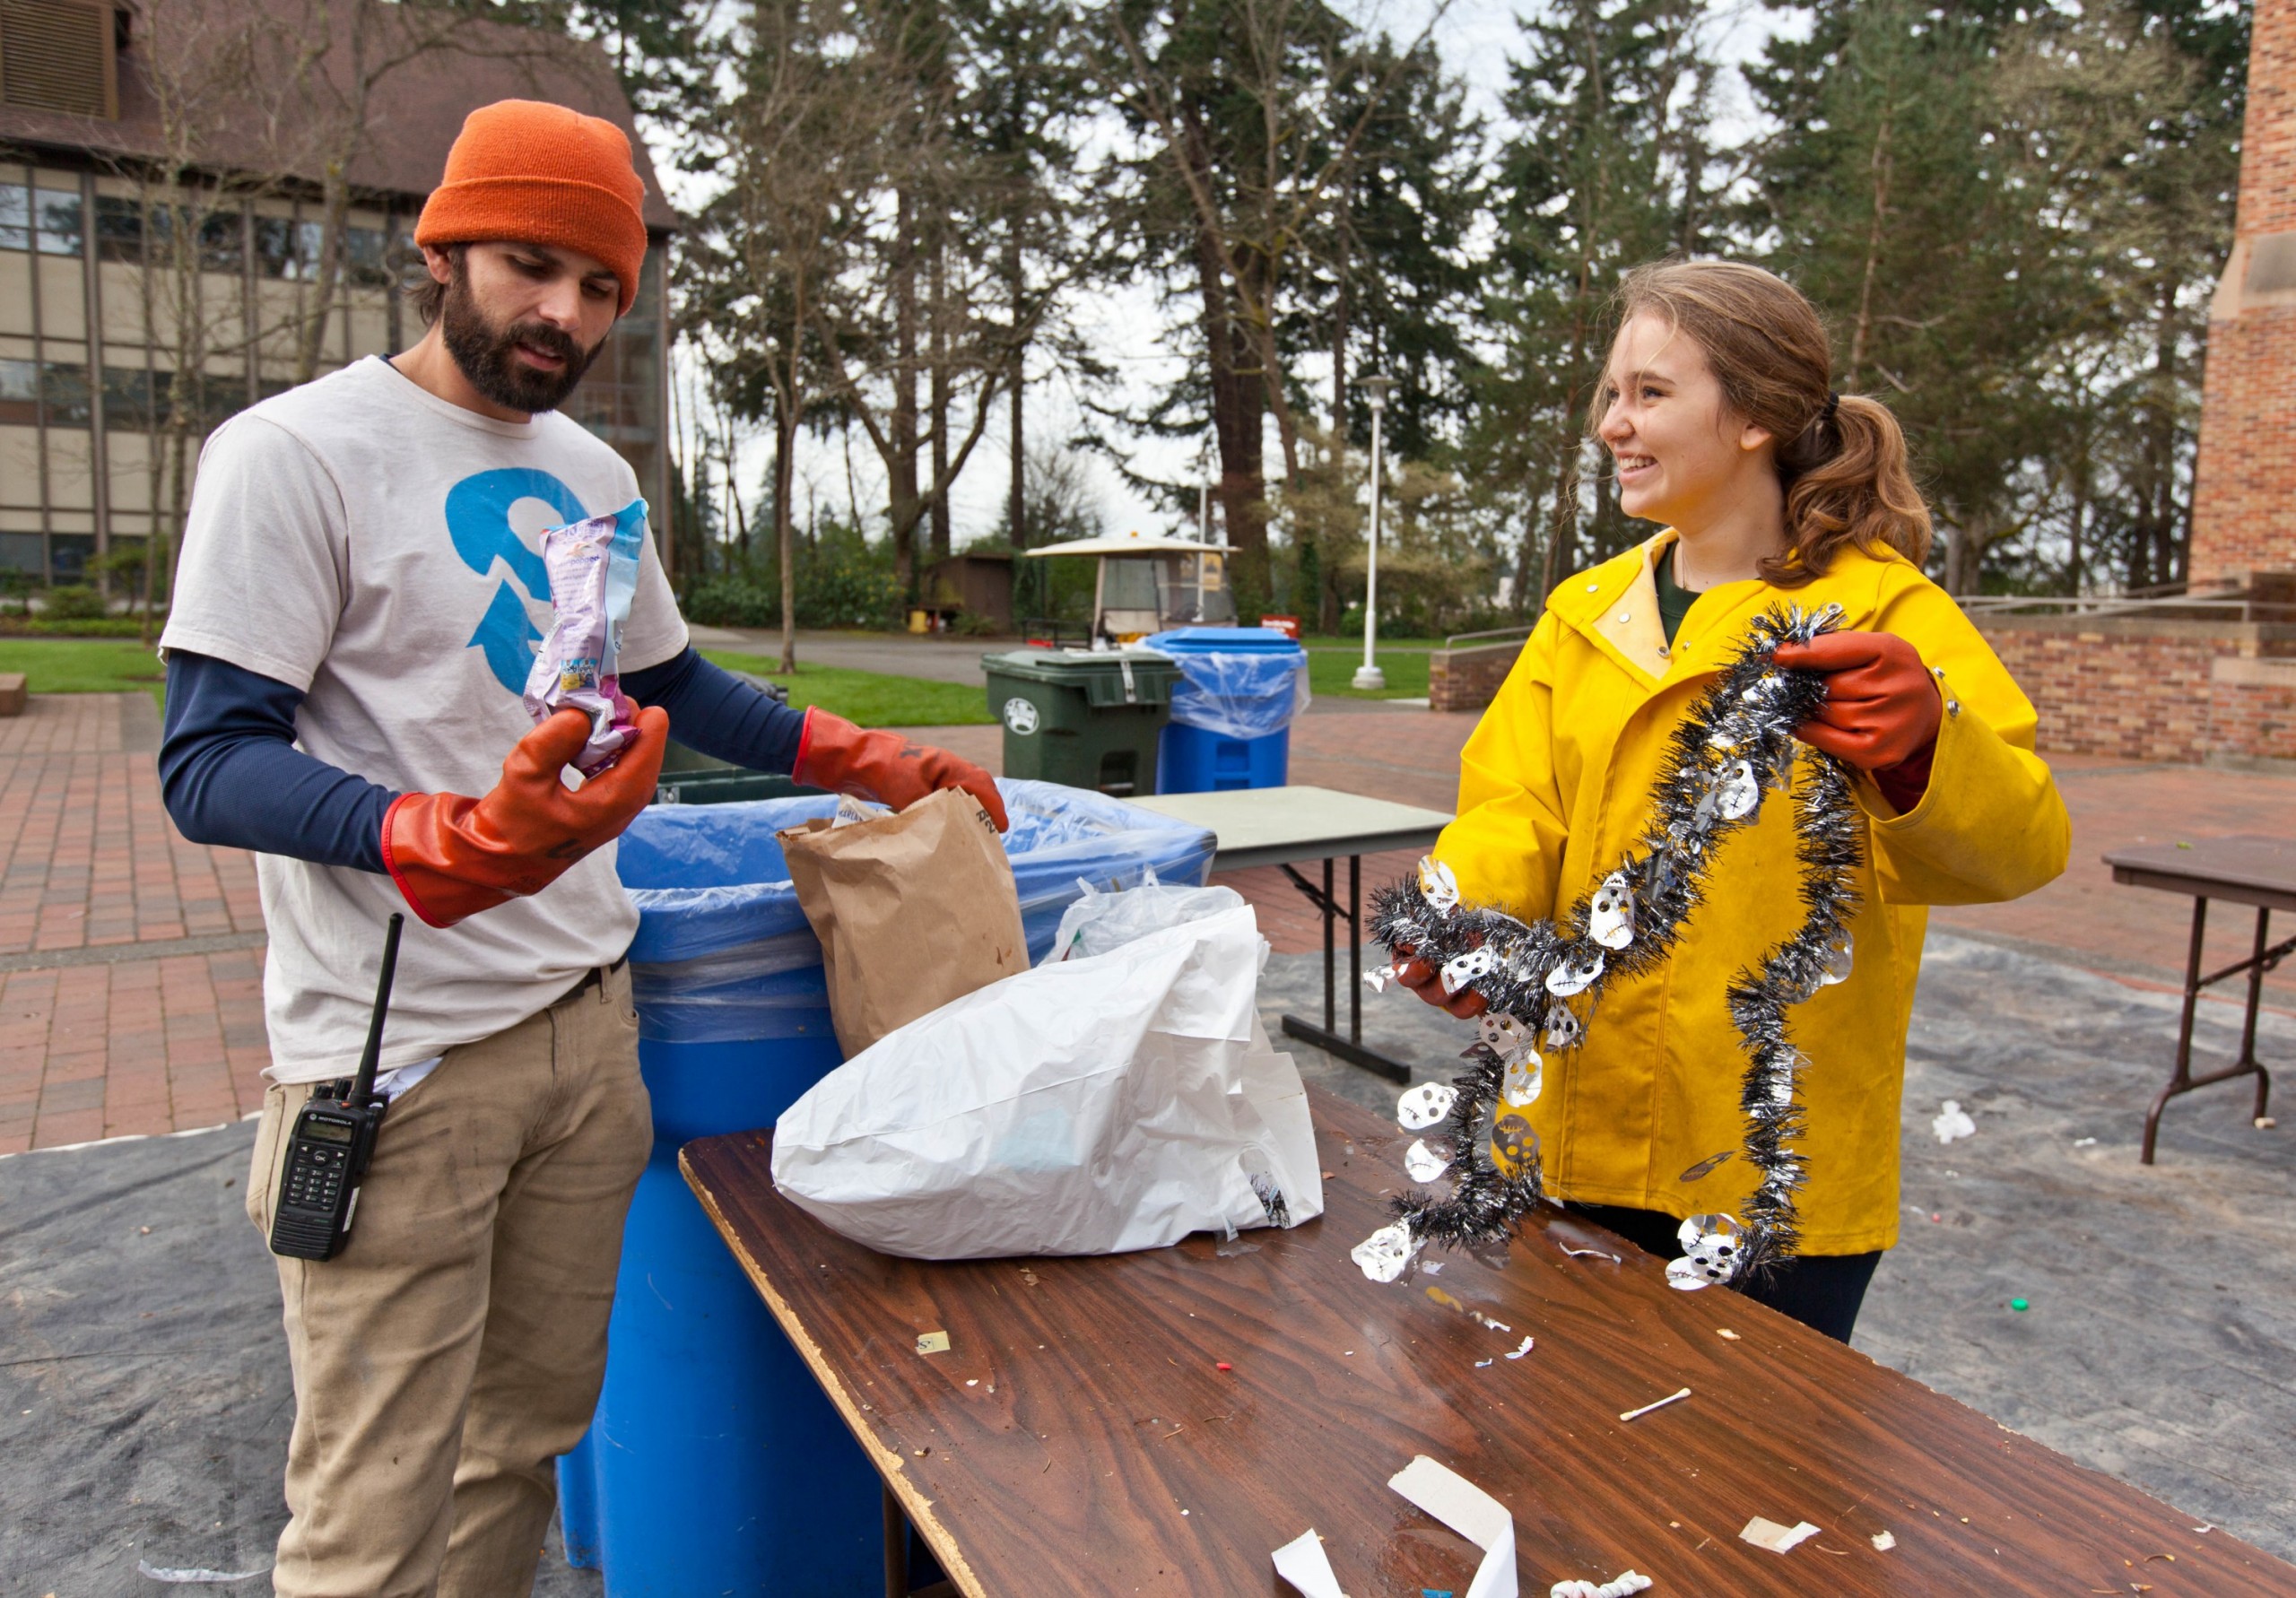 Nick Lorax and Savannah Phalan 15, compare their finds while working on a table of trash during Garbology on Red Square, where grash from different locations is sorted to determine how much is recycleable or compostable at PLU on Tuesday, March 17, 2015. (Photo: John Froschauer/PLU)